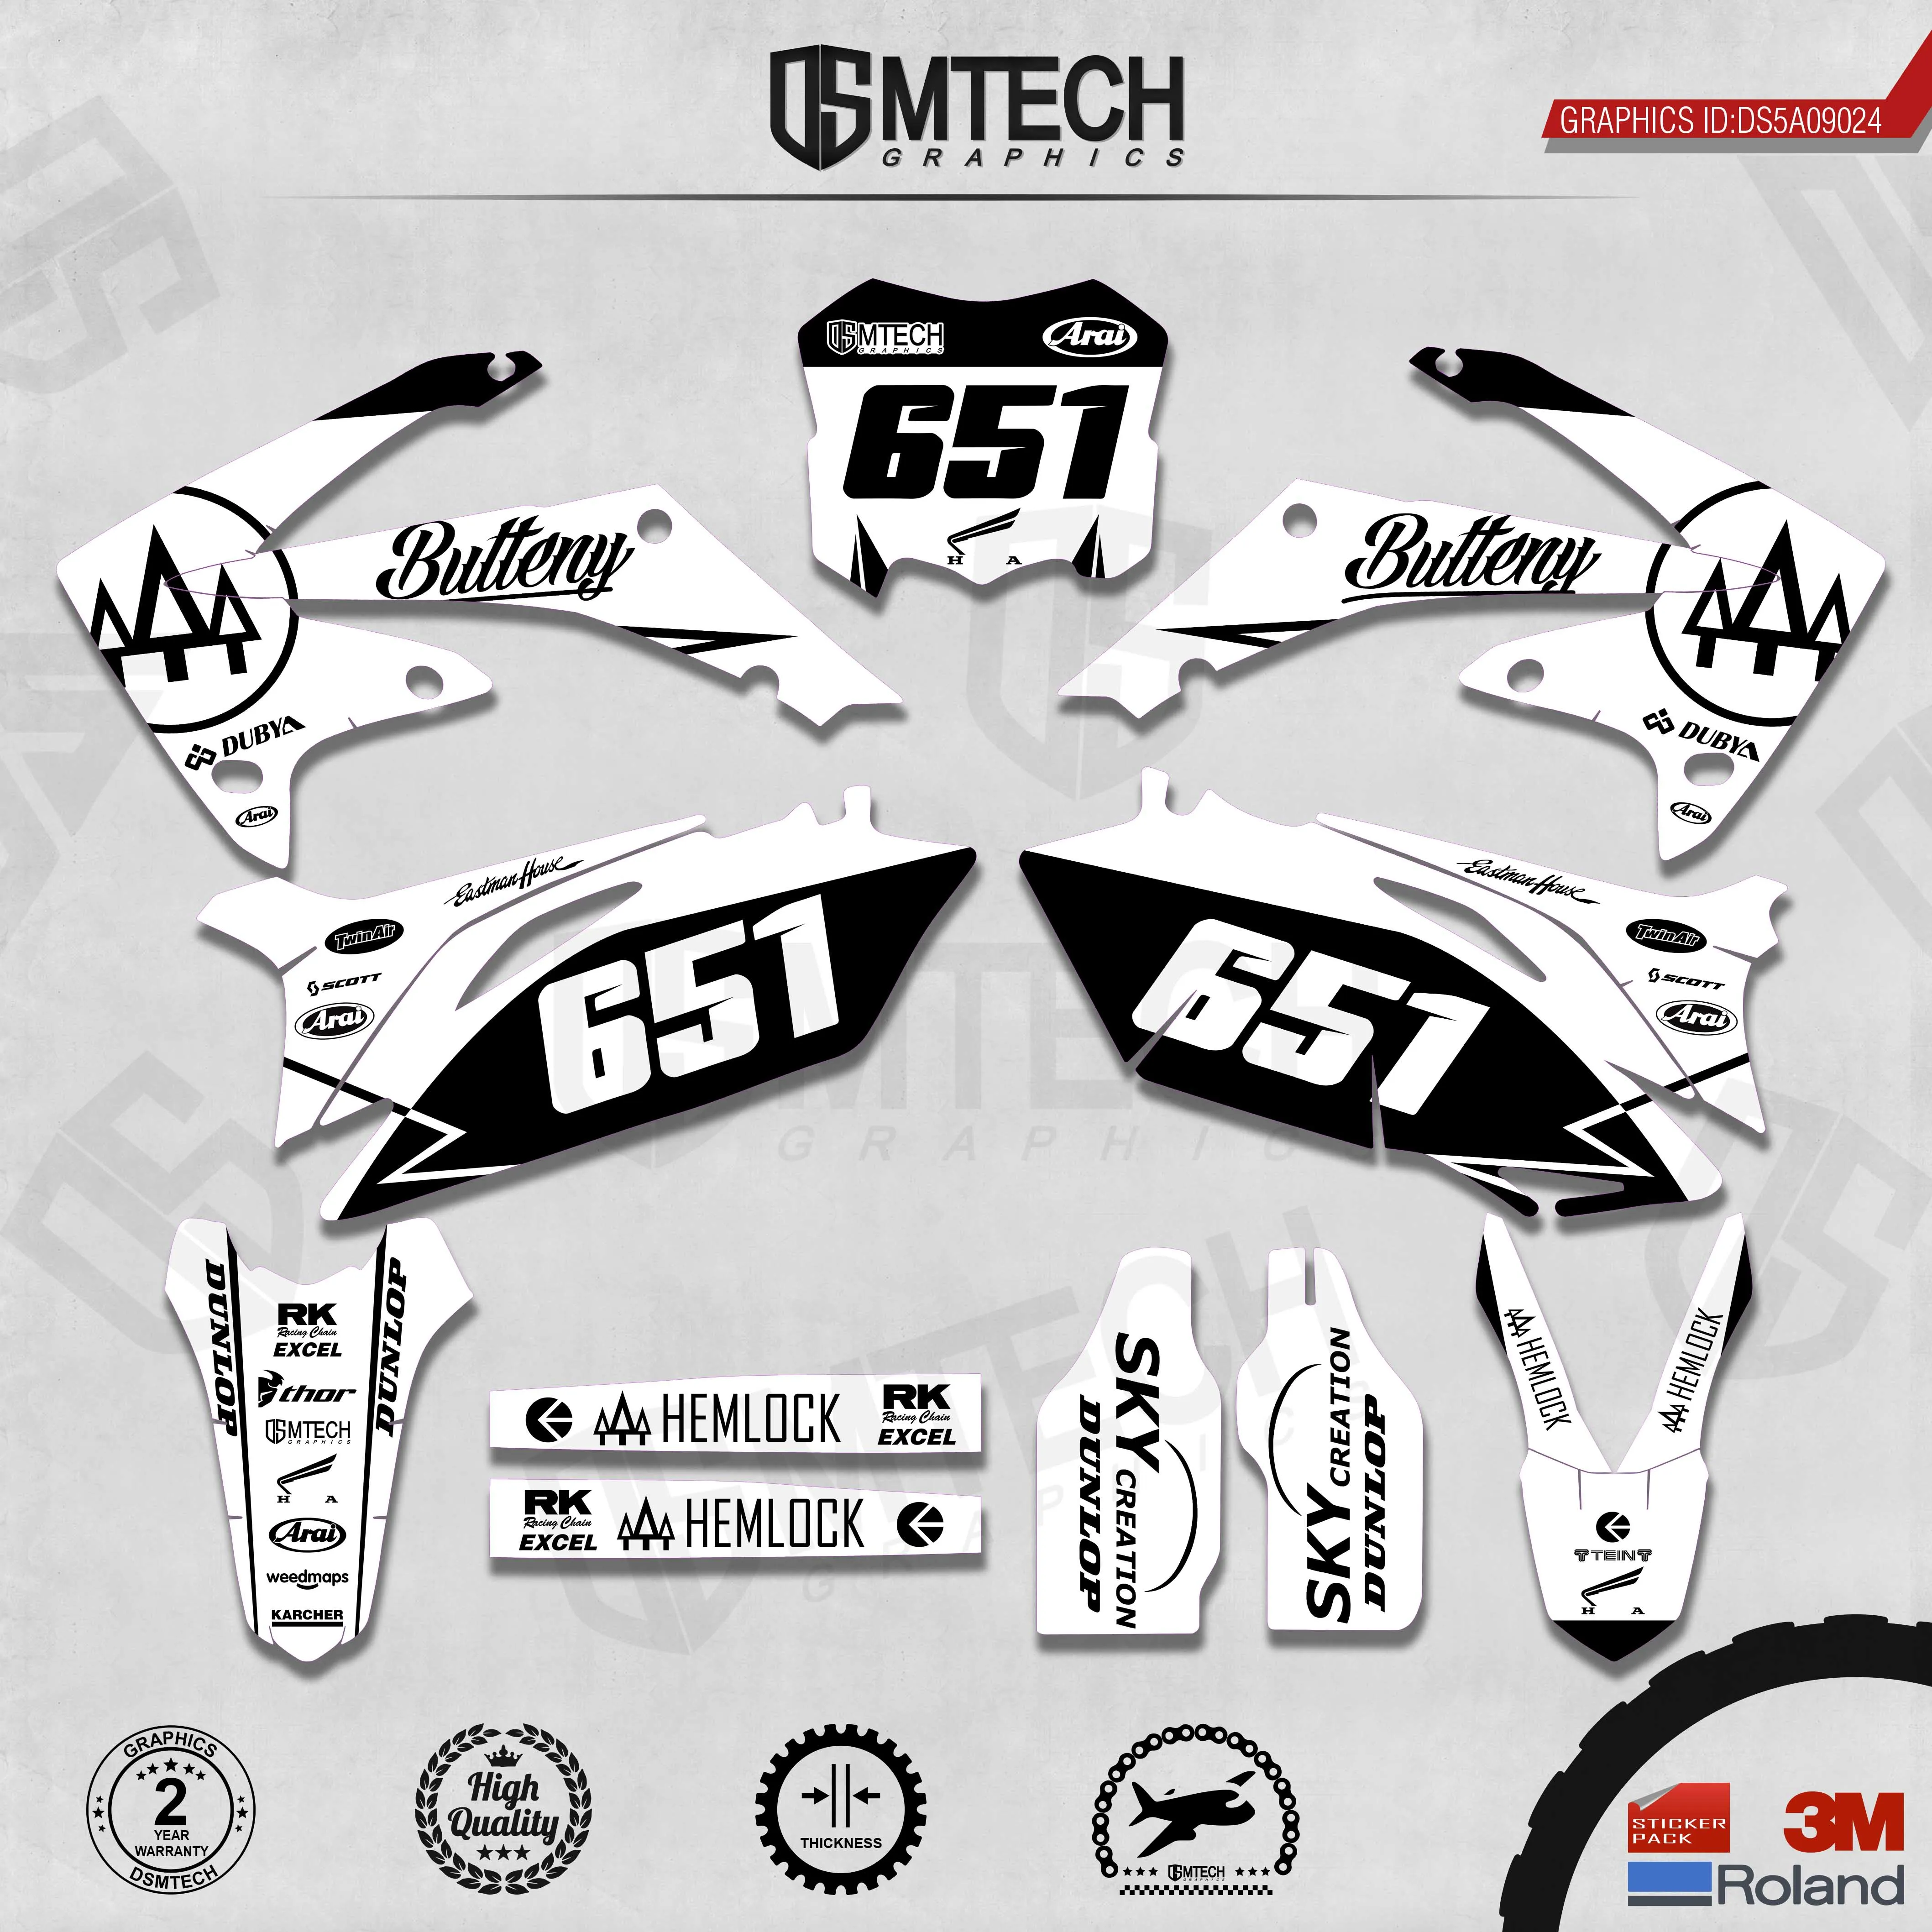 DSMTECH Customized Team Graphics Backgrounds Decals 3M Custom Stickers For 2010-2013 CRF250R 2009-2012 CRF450R 024